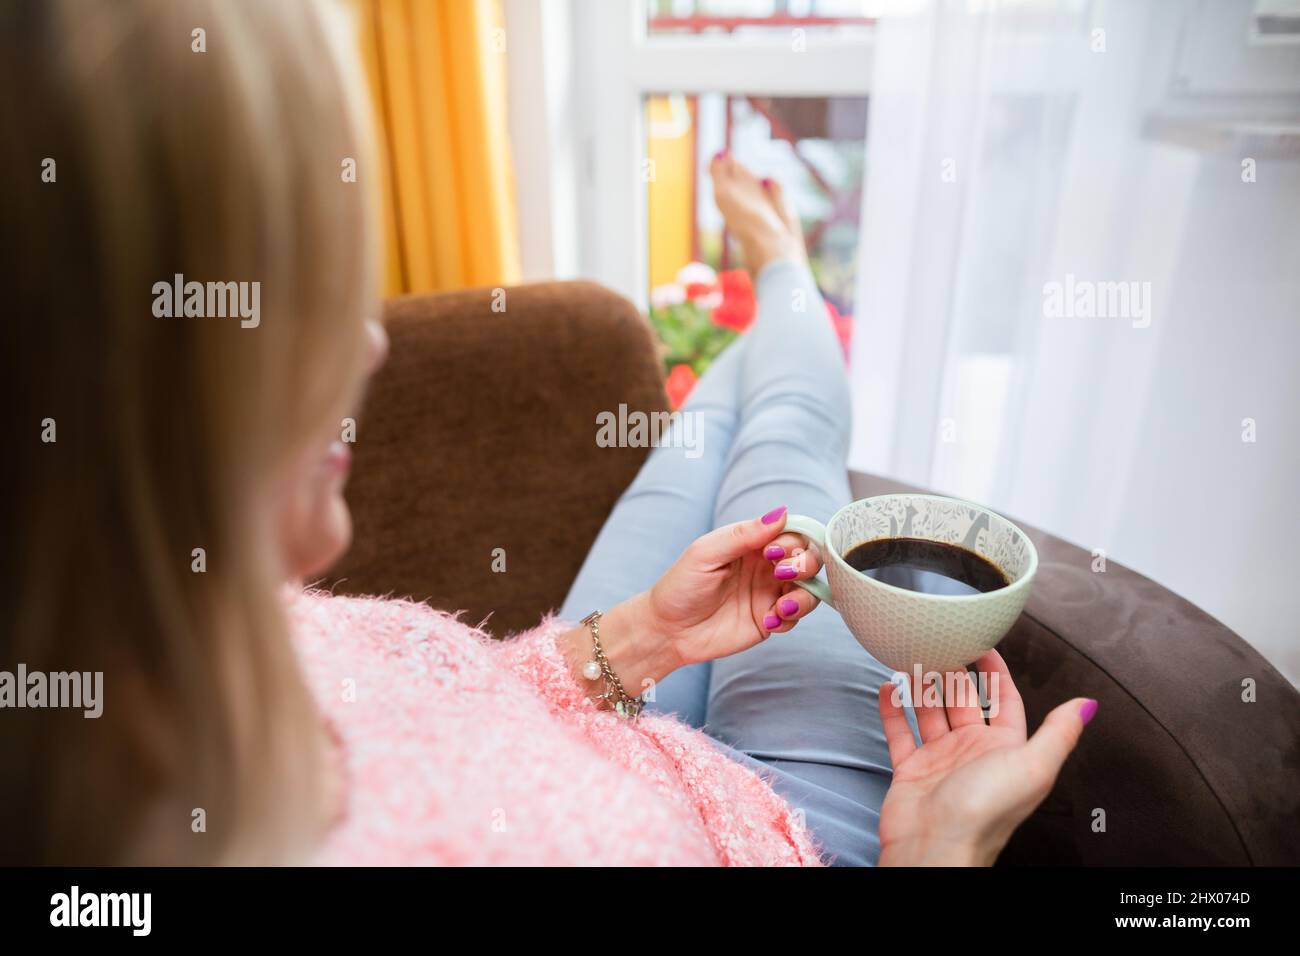 A young woman holds a cup and looks ahead. Stock Photo